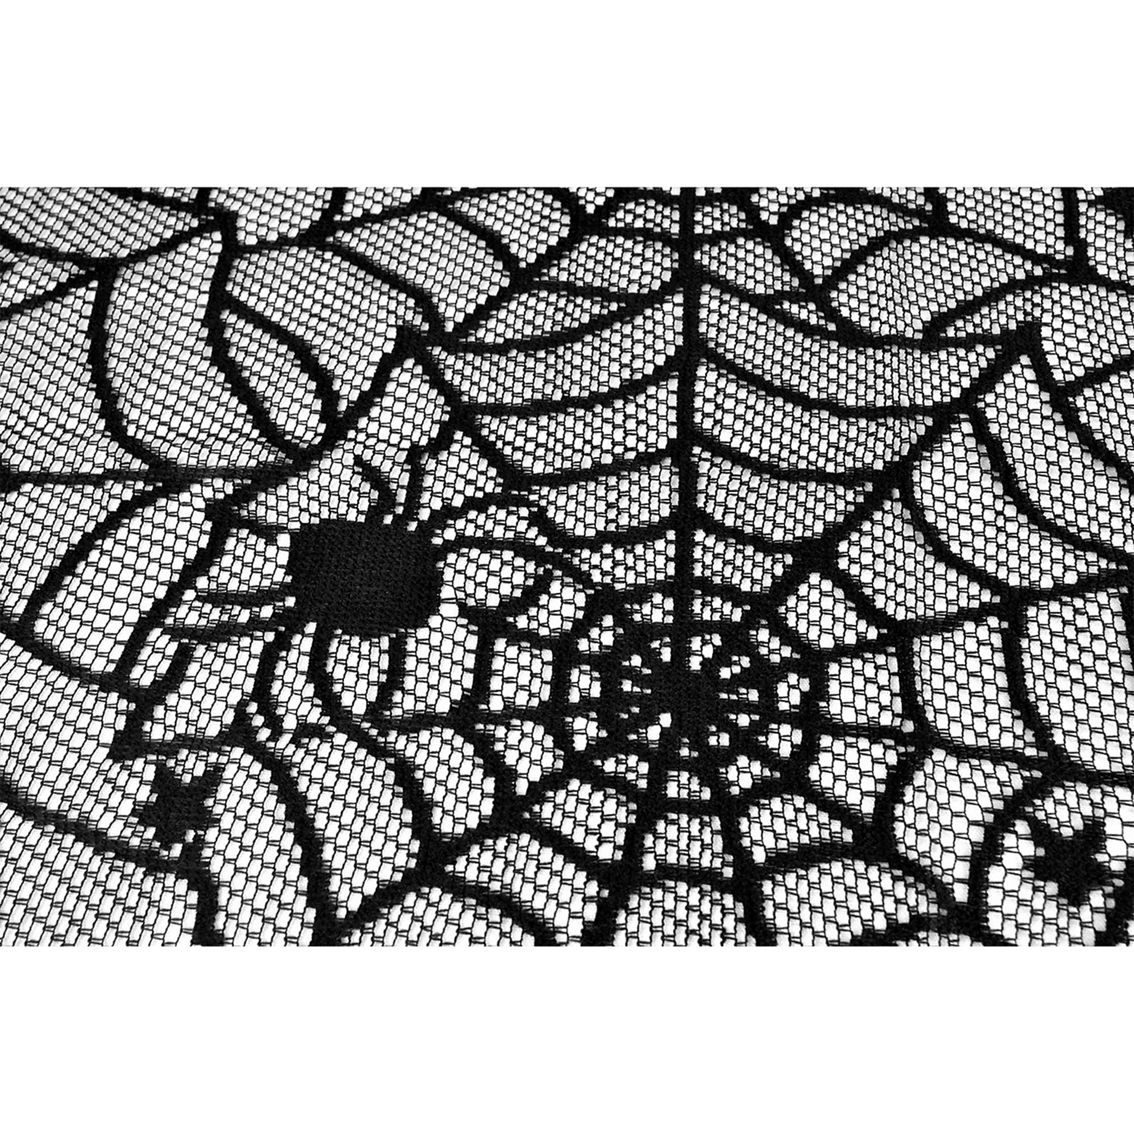 Design Imports 54 in. x 72 in. Halloween Lace Tablecloth - Image 9 of 9